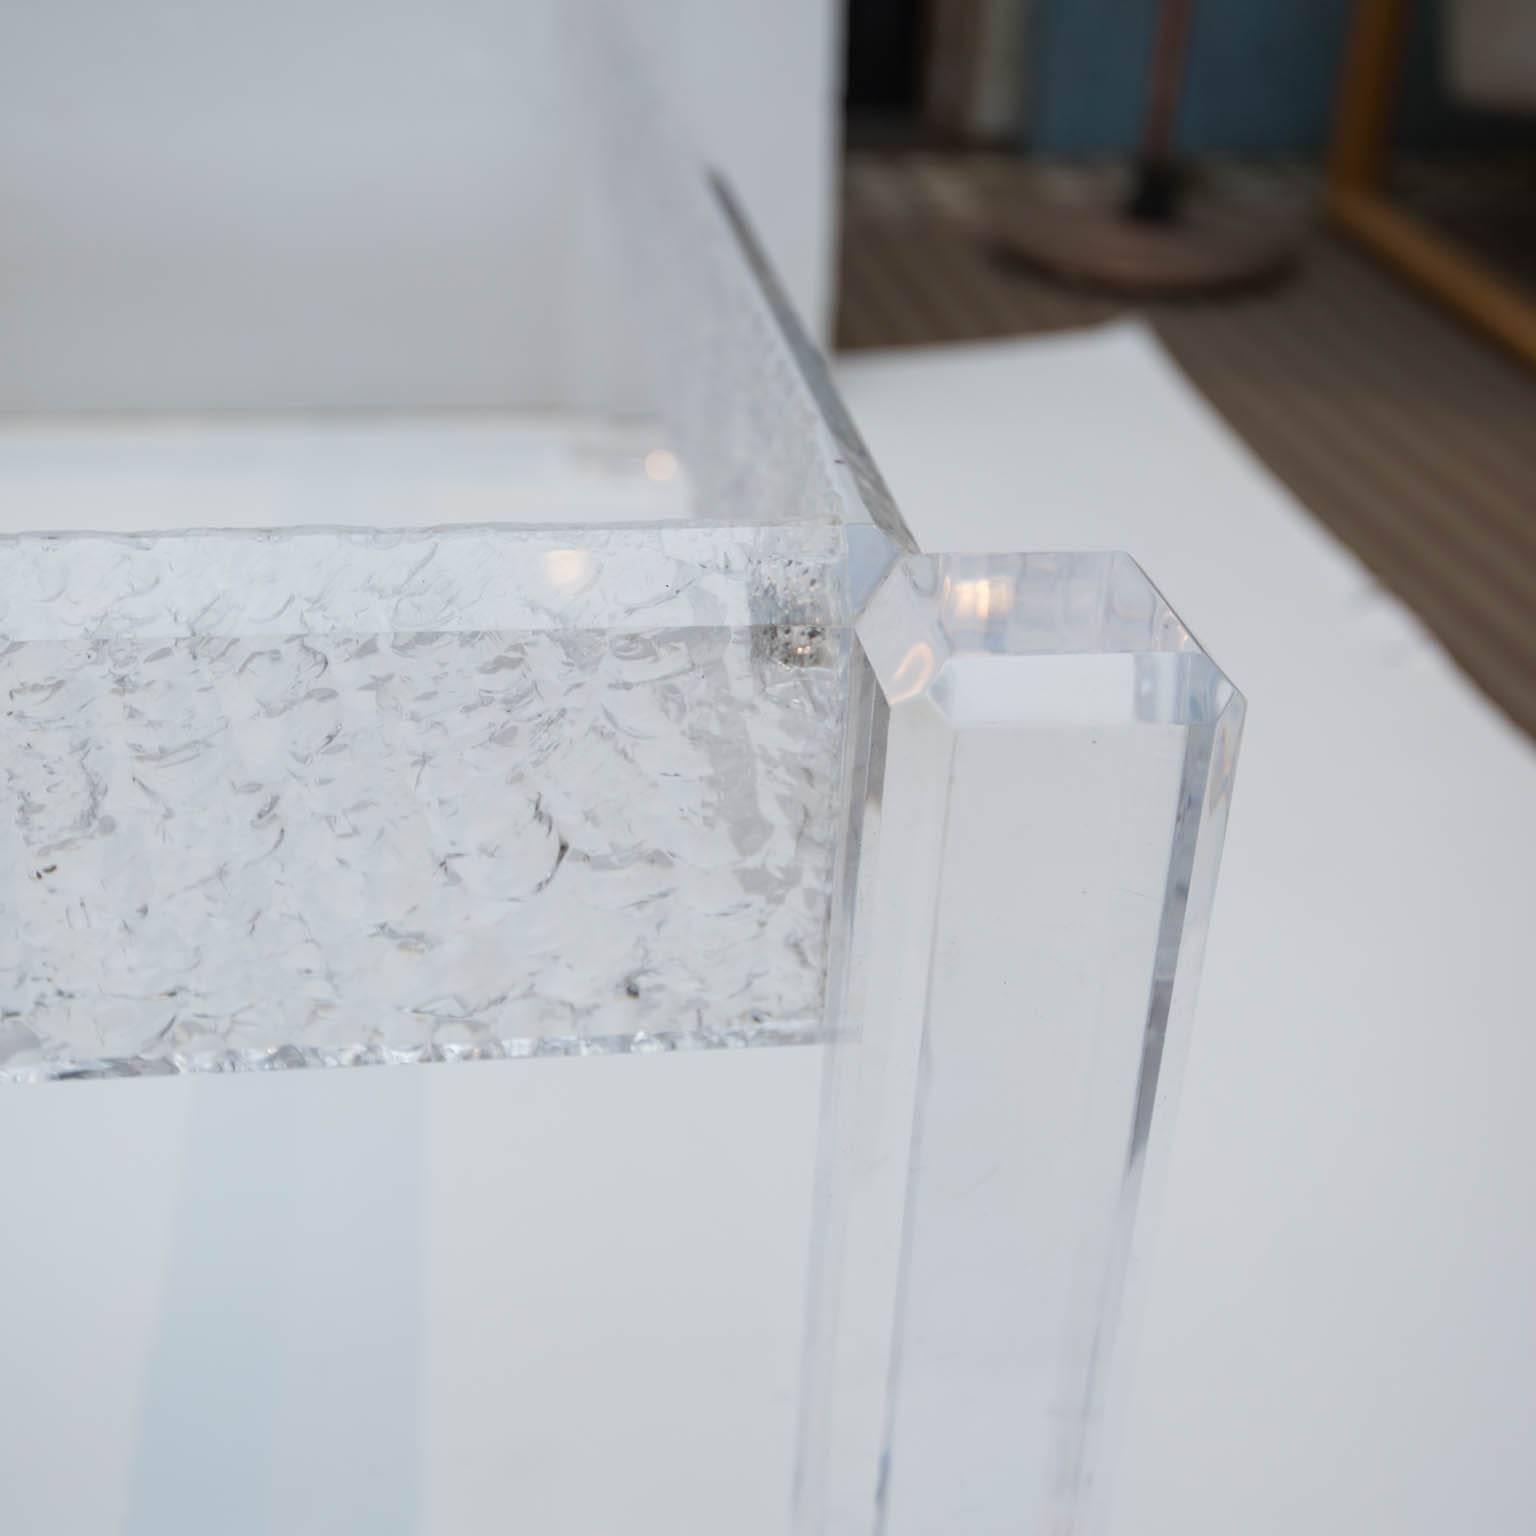 If you love Lucite and want something other than mass-produced, clean-edged designs, this is the rare piece you've been looking for. Made from solid Lucite, this is being sold without the 1/2